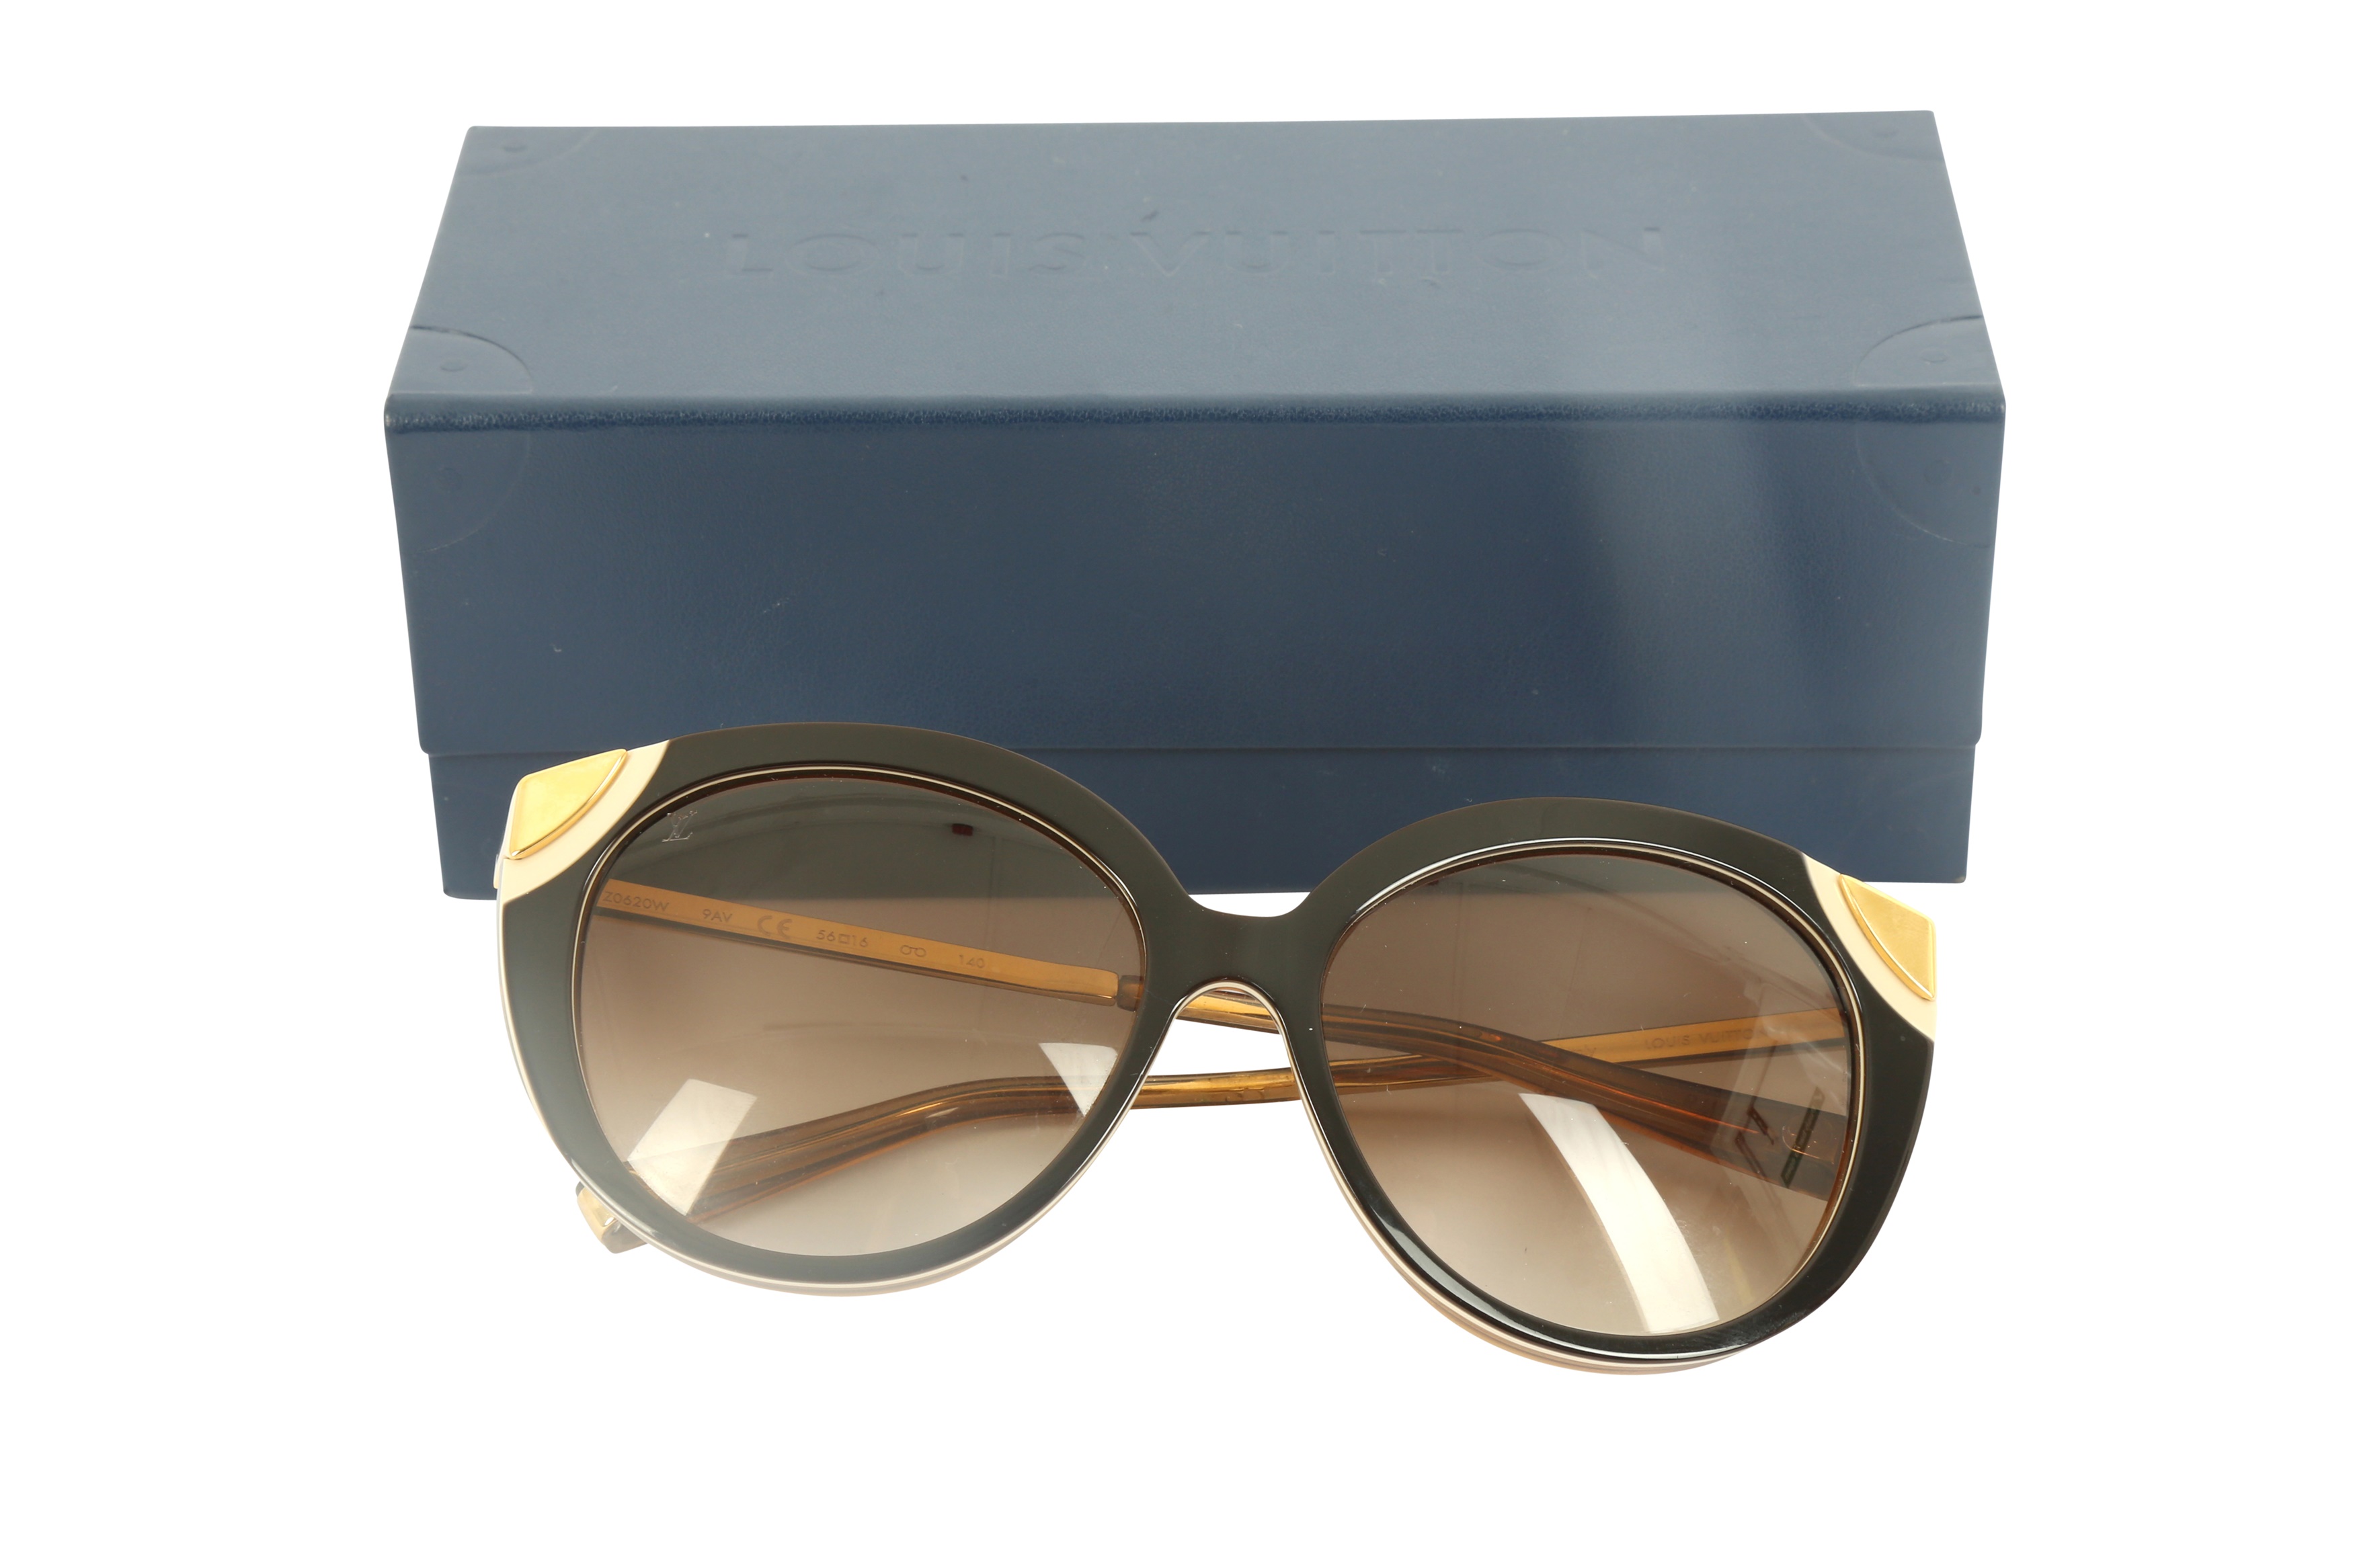 Sold at Auction: New in Box Louis Vuitton Aviator Sunglasses